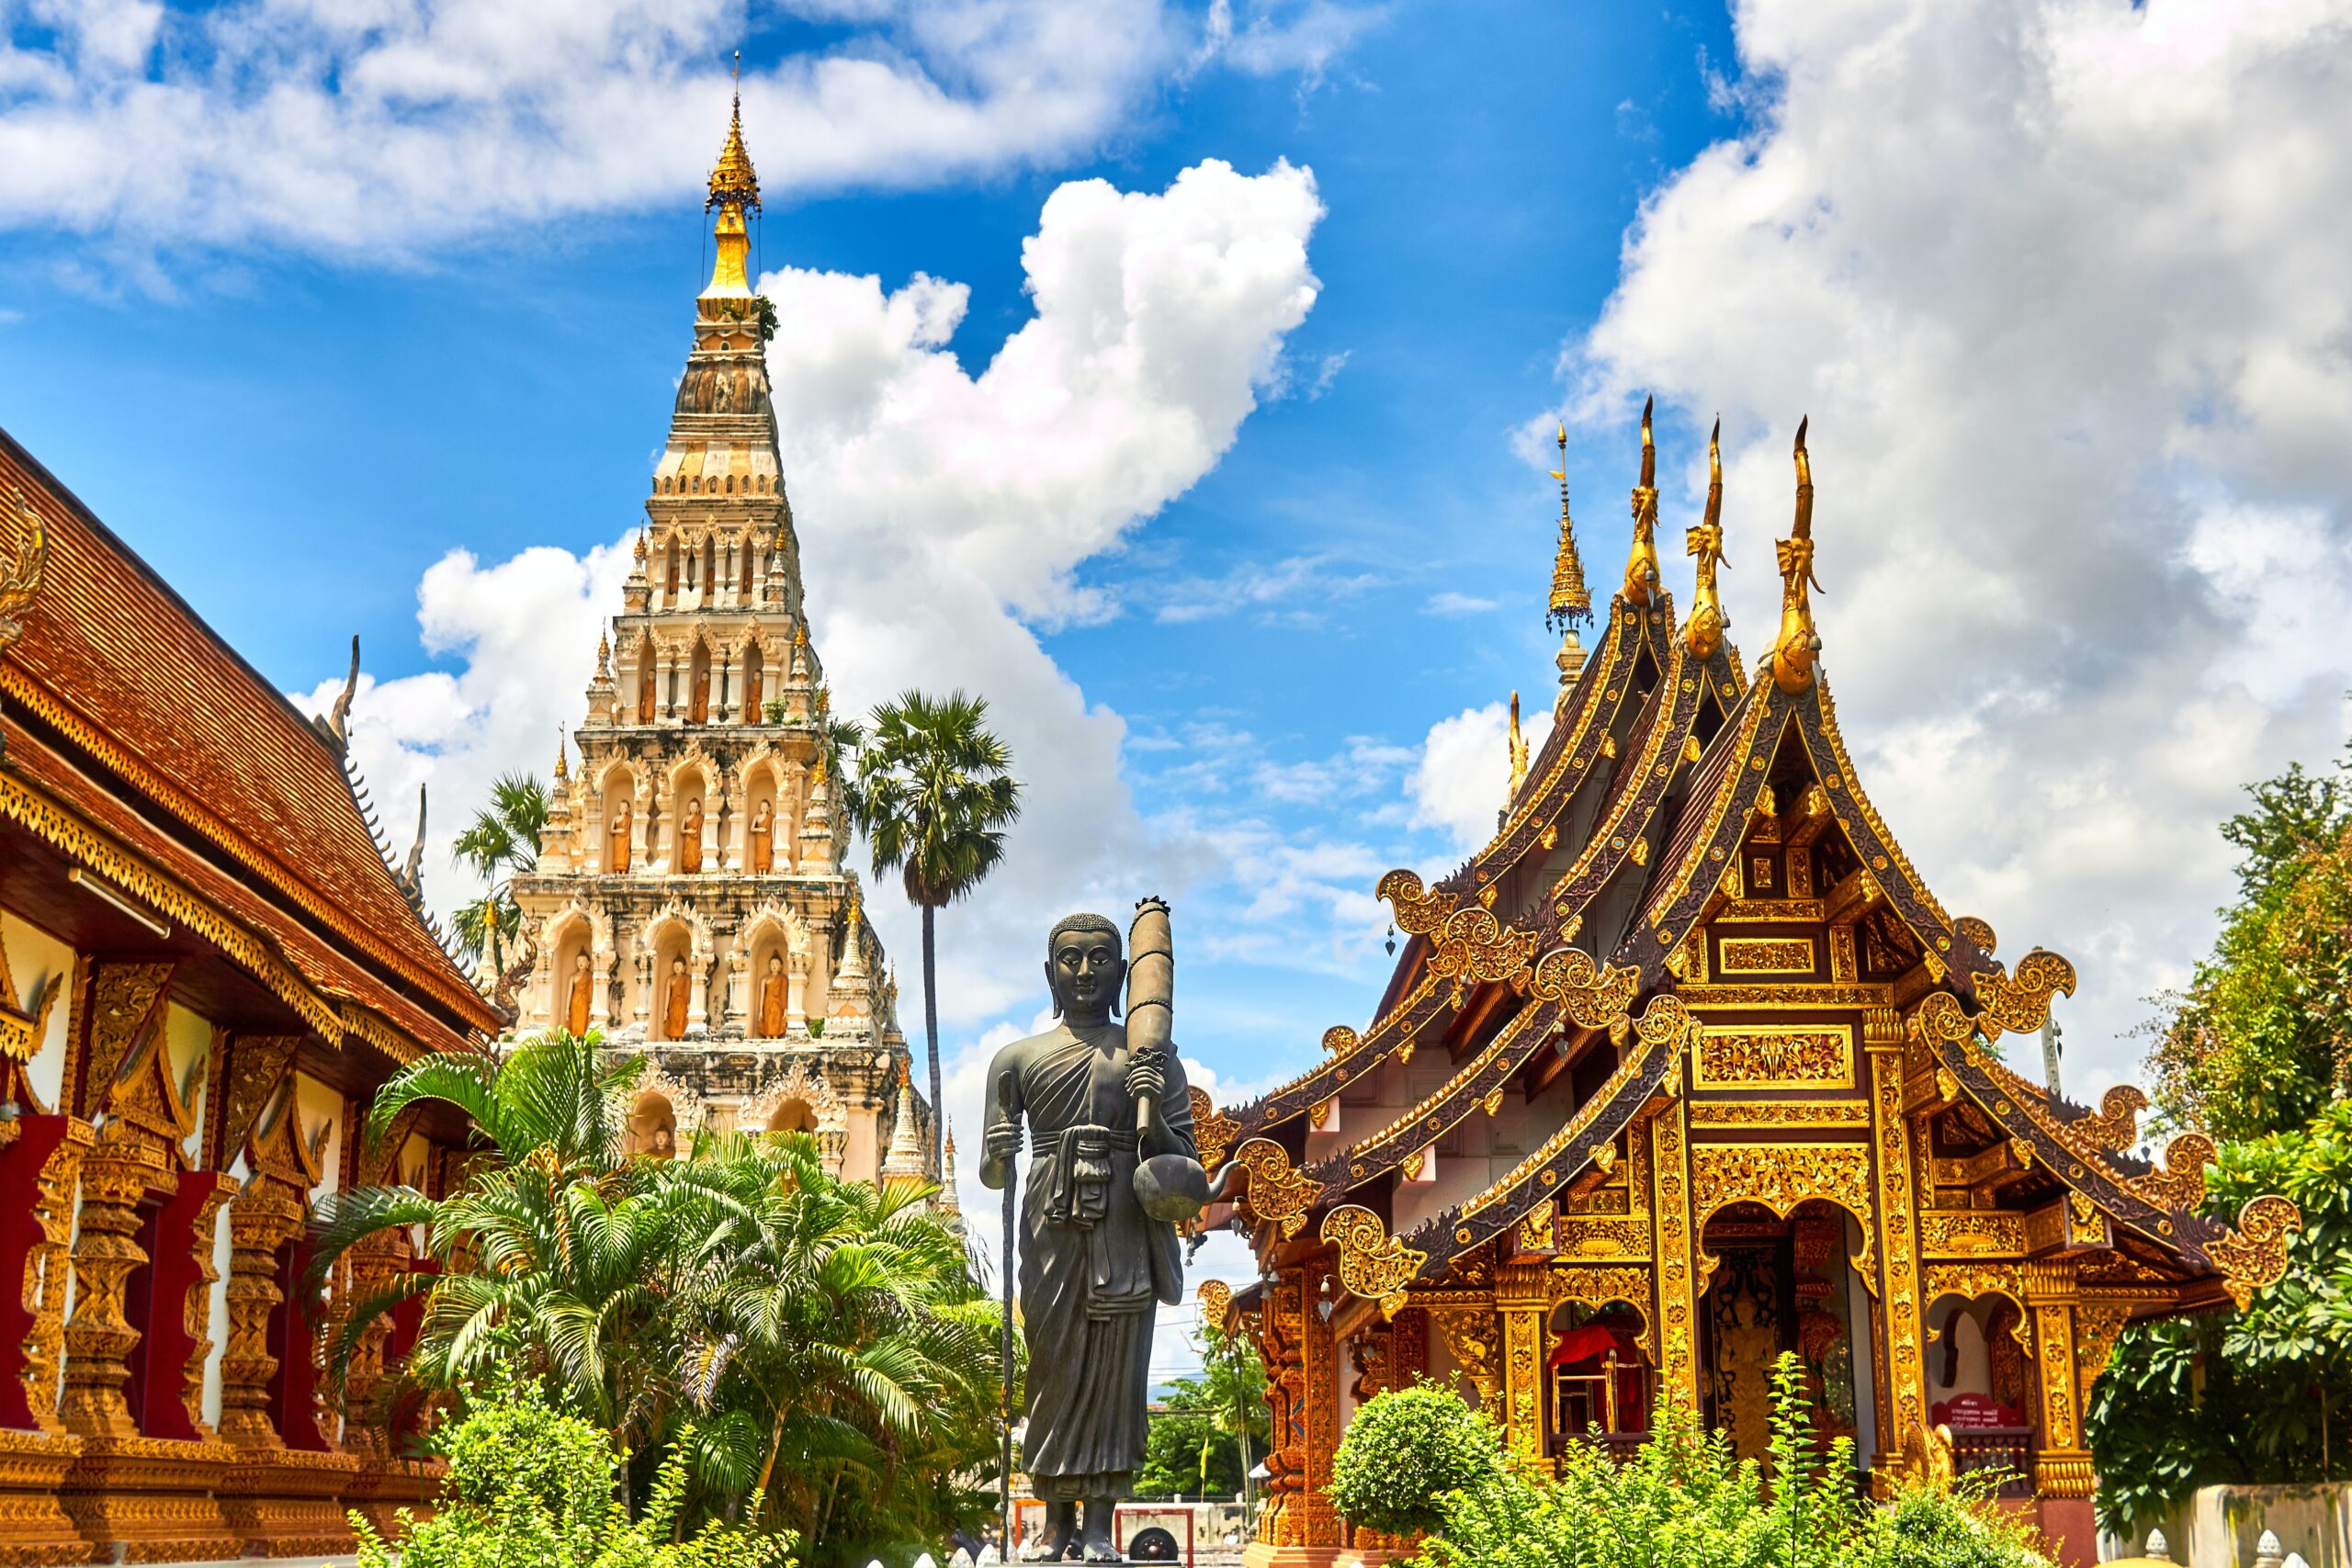 These advisories are the most informative for travelers trying to enjoy Thailand. 
Pictured: a Buddhist temple in Thailand on a bright sunny day